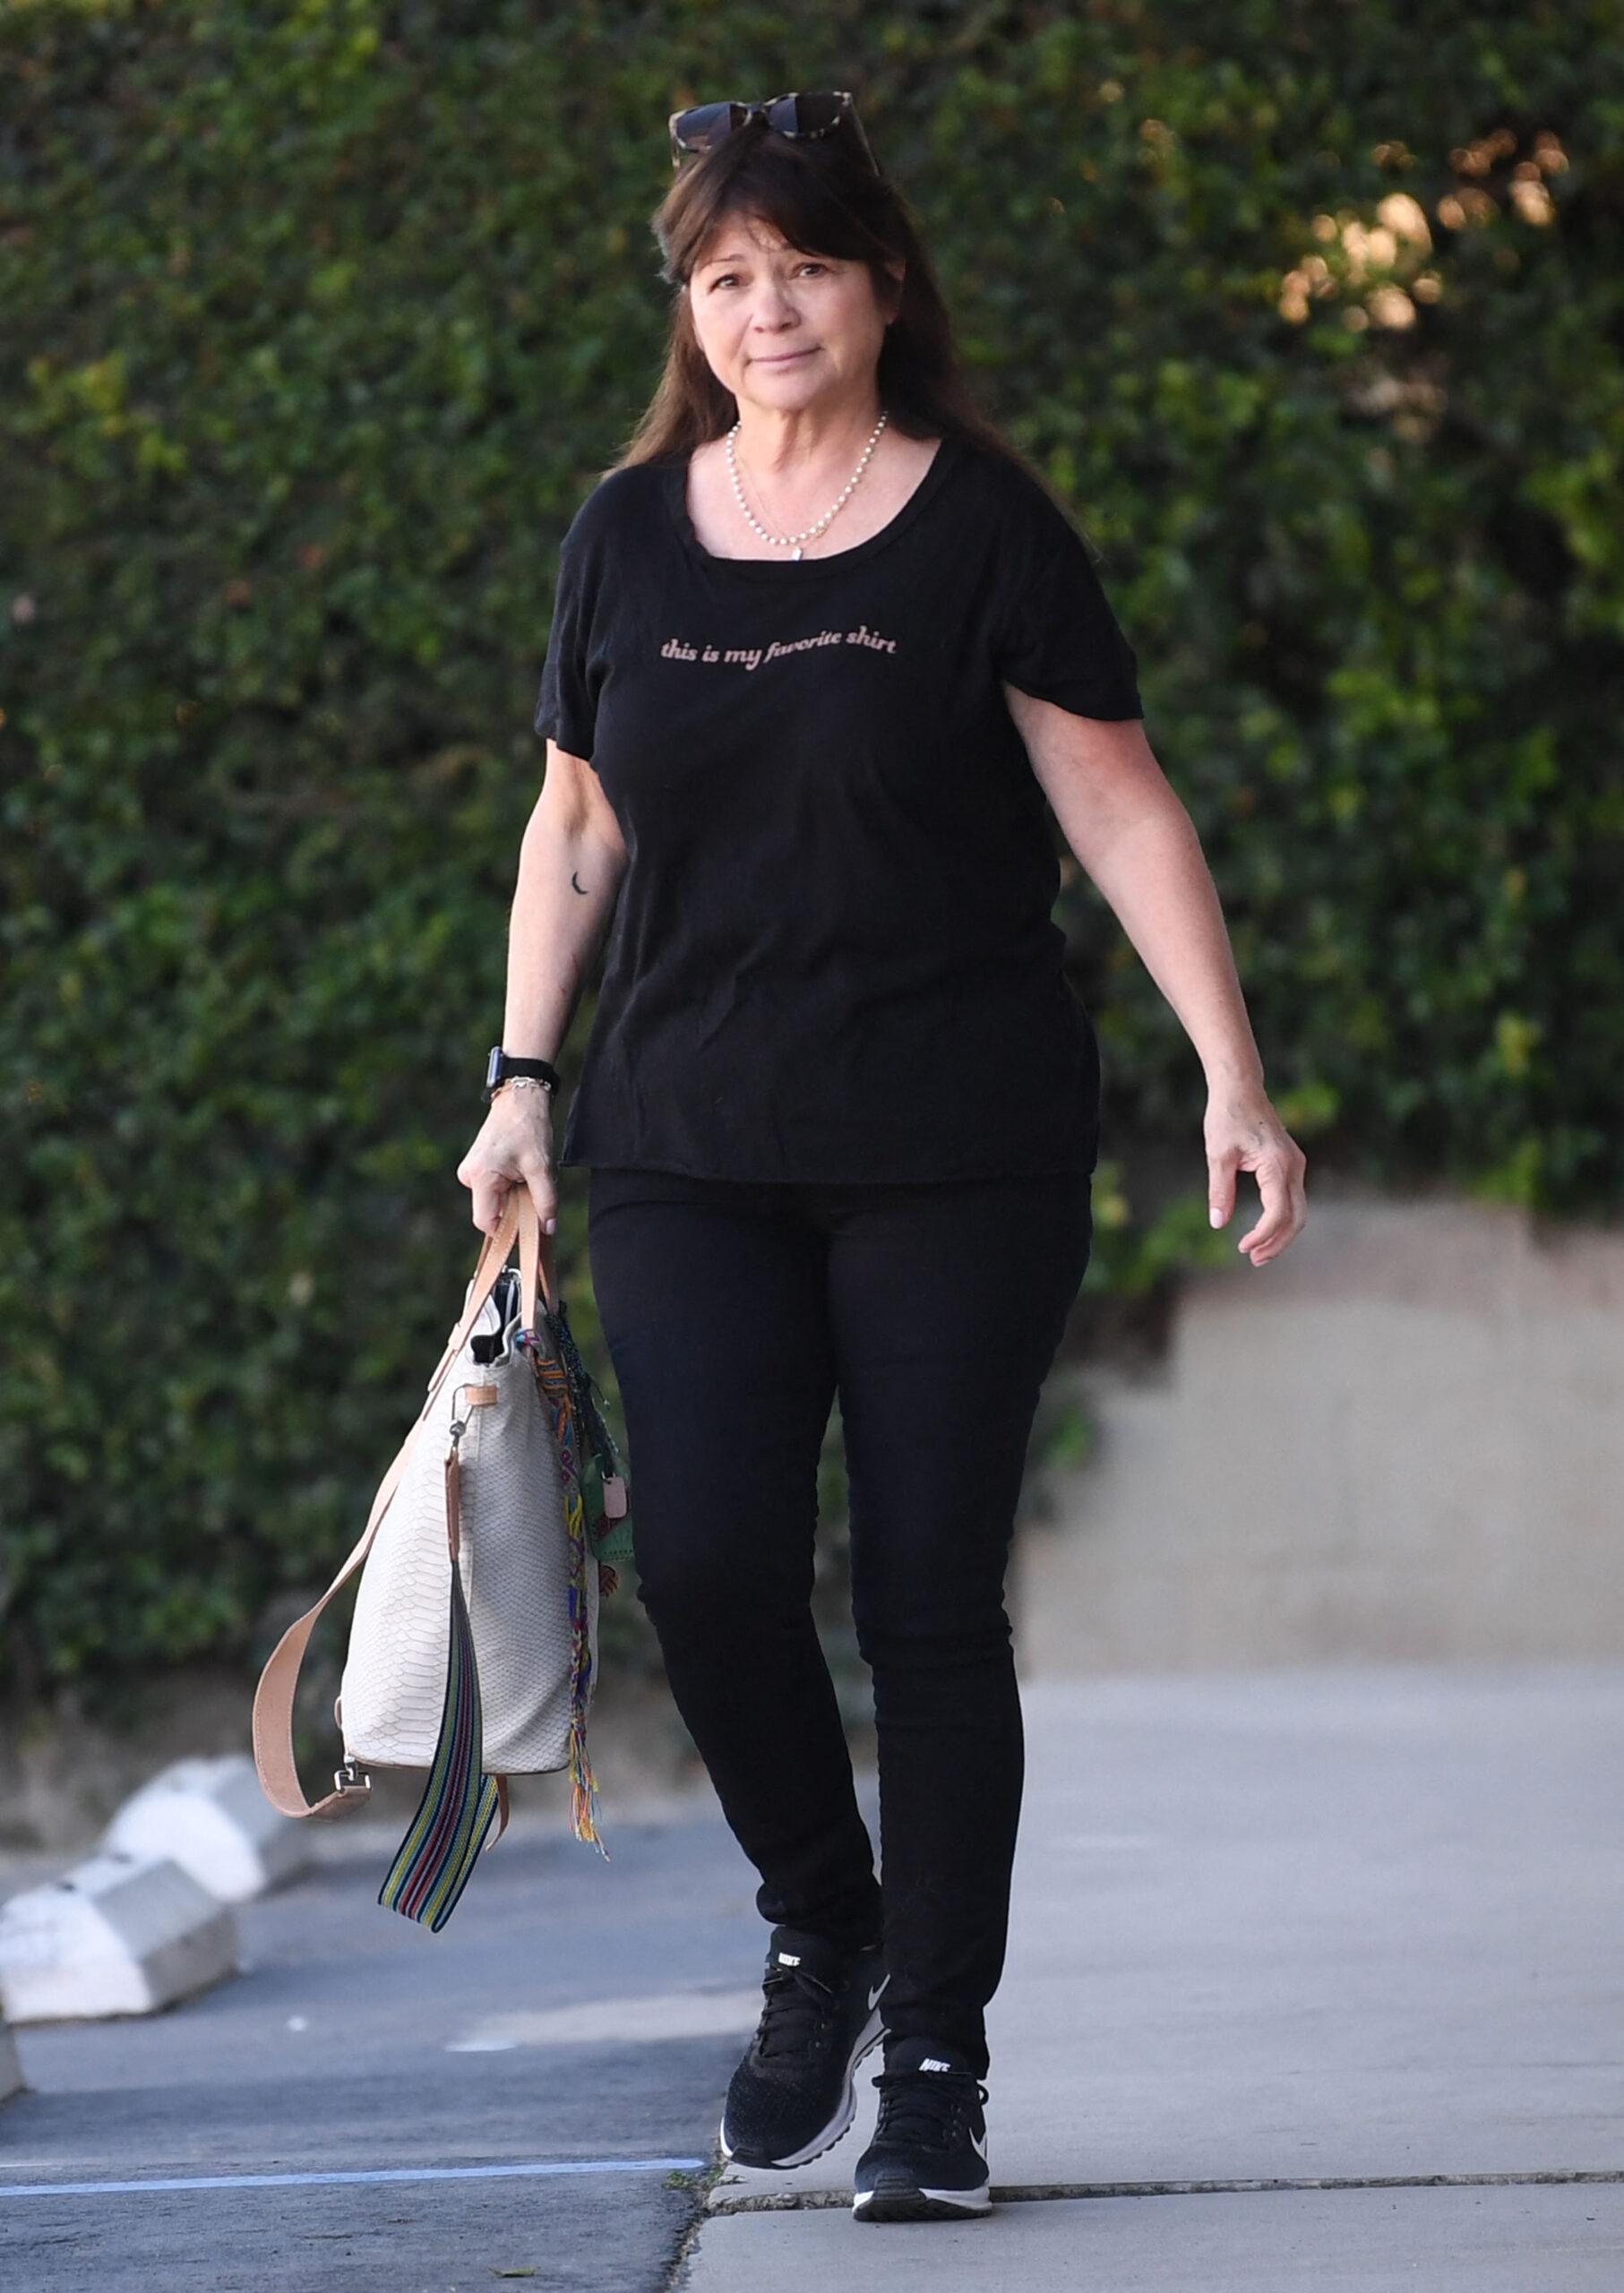 Valerie Bertinelli steps out after paying tribute to ex-fling Matthew Perry posting "Rest in peace, sweet man.